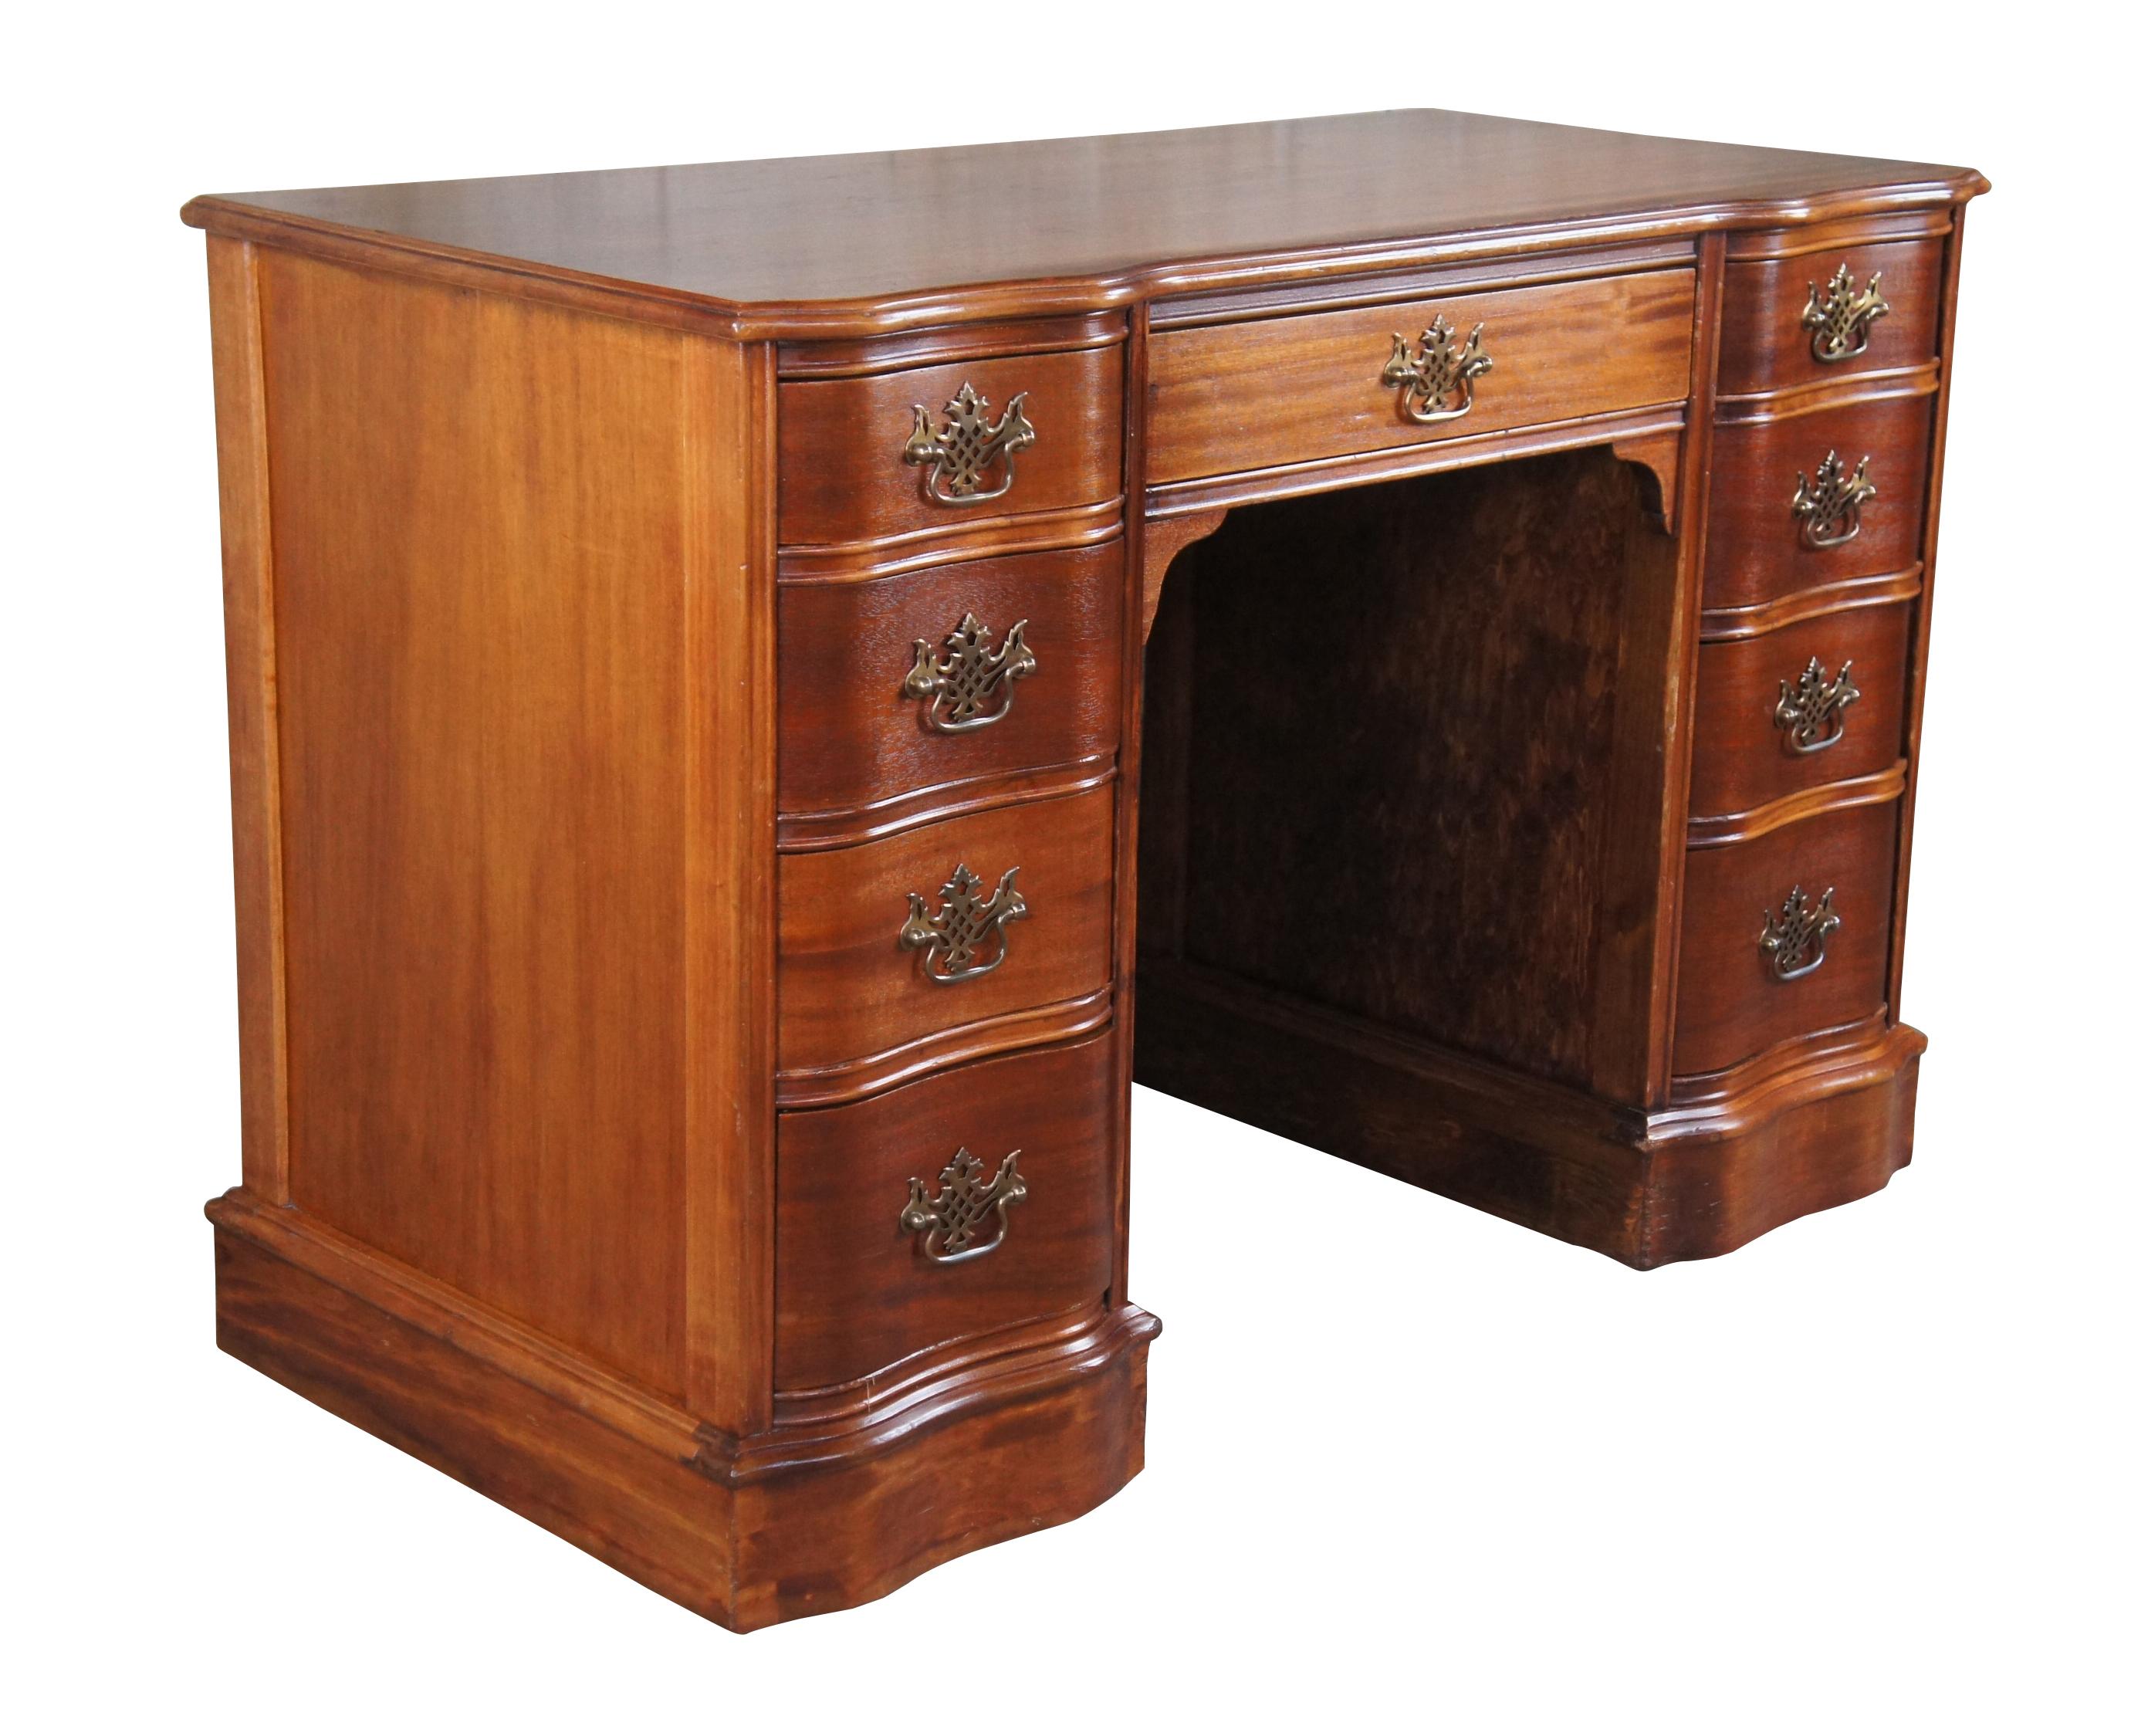 Antique Chippendale library writing desk.  Made of mahogany featuring serpentine rectangular form with nine dovetailed drawers and pierced brass hardware.

Dimensions:
43.5